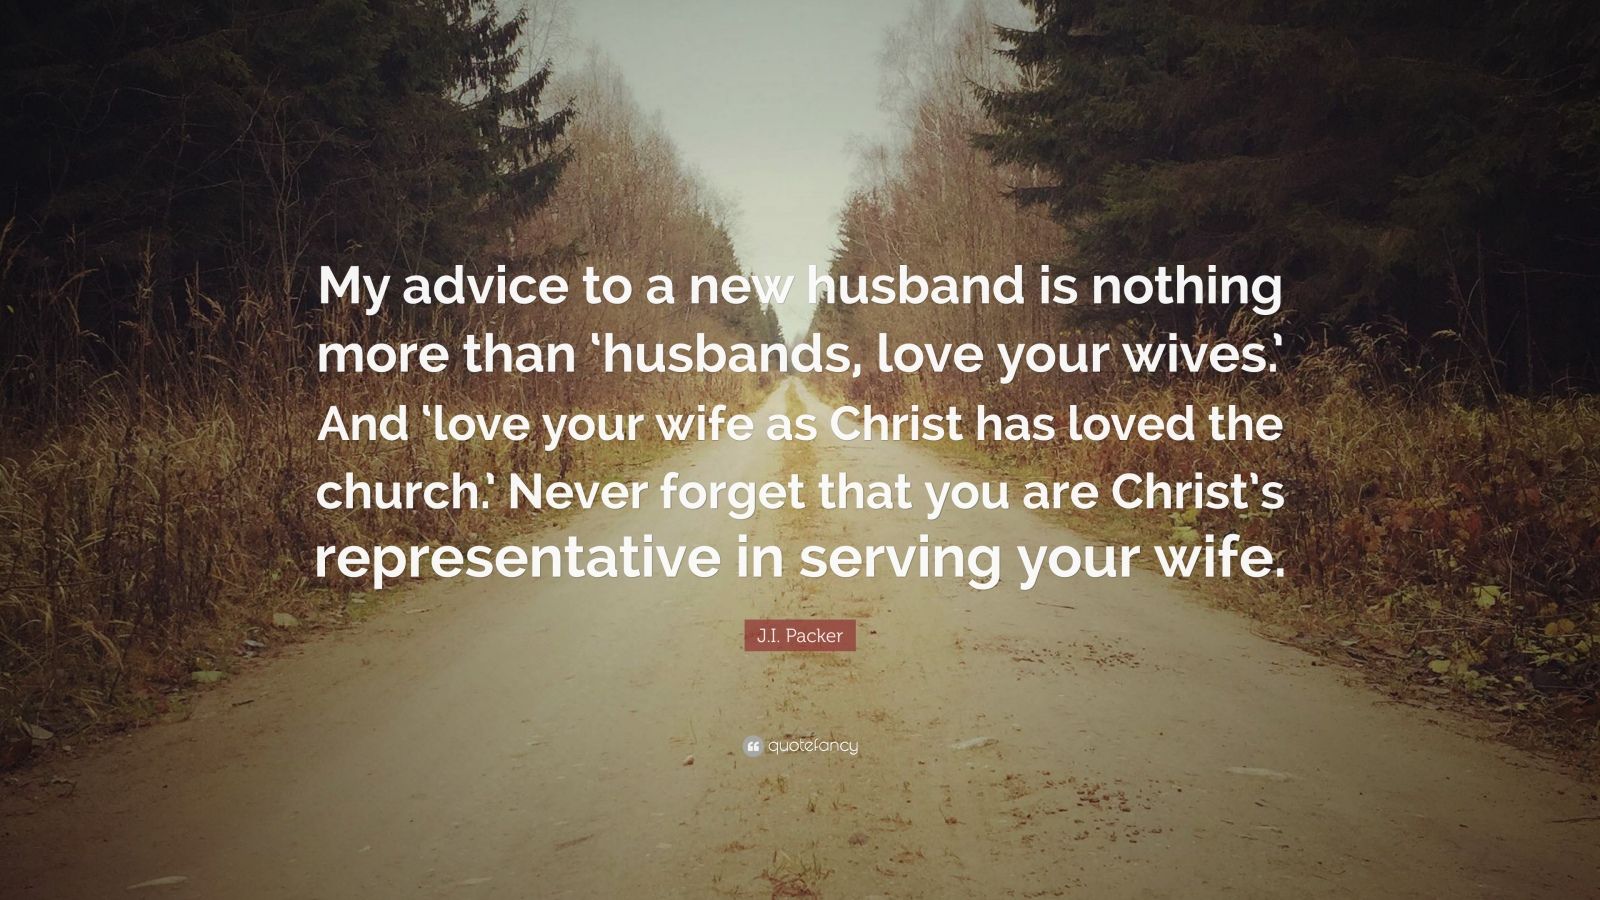 J.I. Packer Quote: "My advice to a new husband is nothing ...